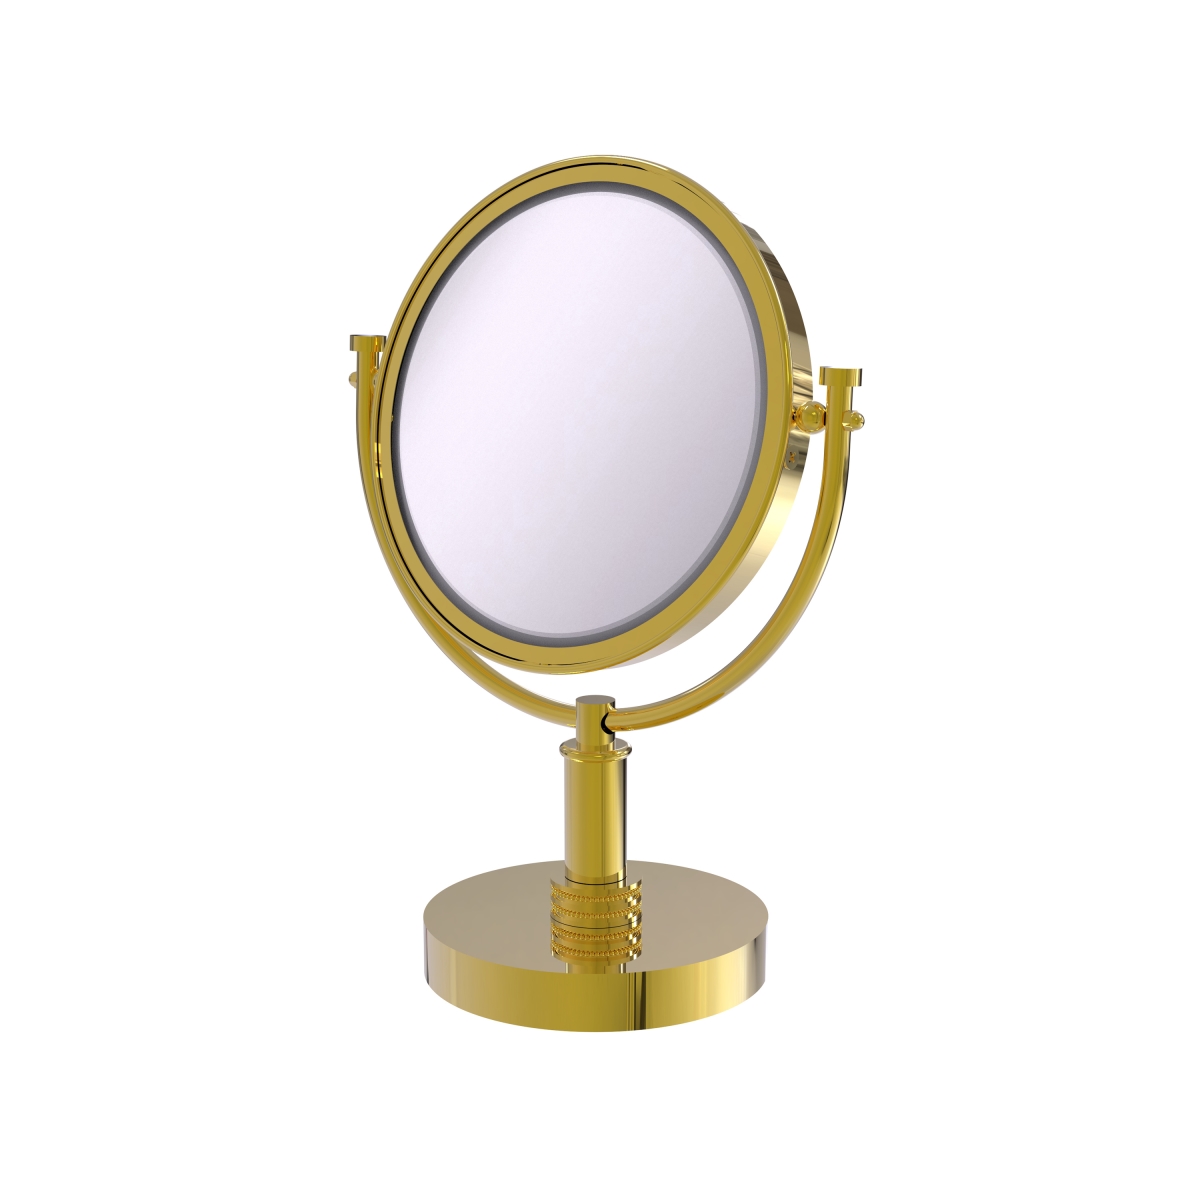 Picture of Allied Brass DM-4D-2X-PB 8 in. Vanity Top Make-Up Mirror 2X Magnification, Polished Brass - 15 x 8 x 8 in.